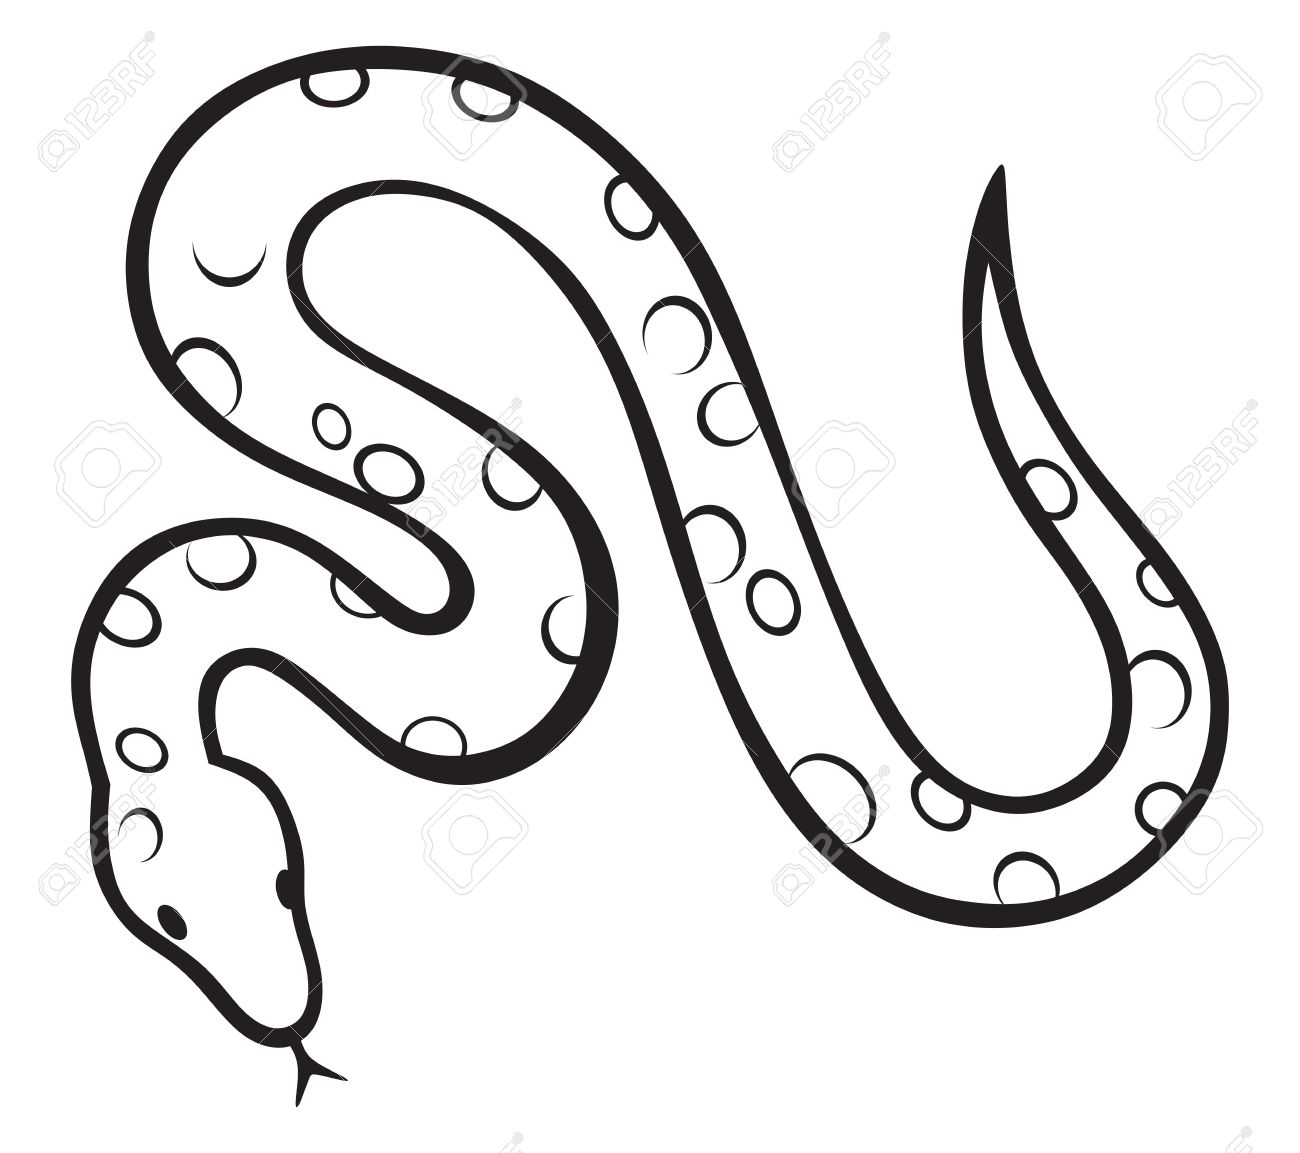 Boa Constrictor clipart #14, Download drawings